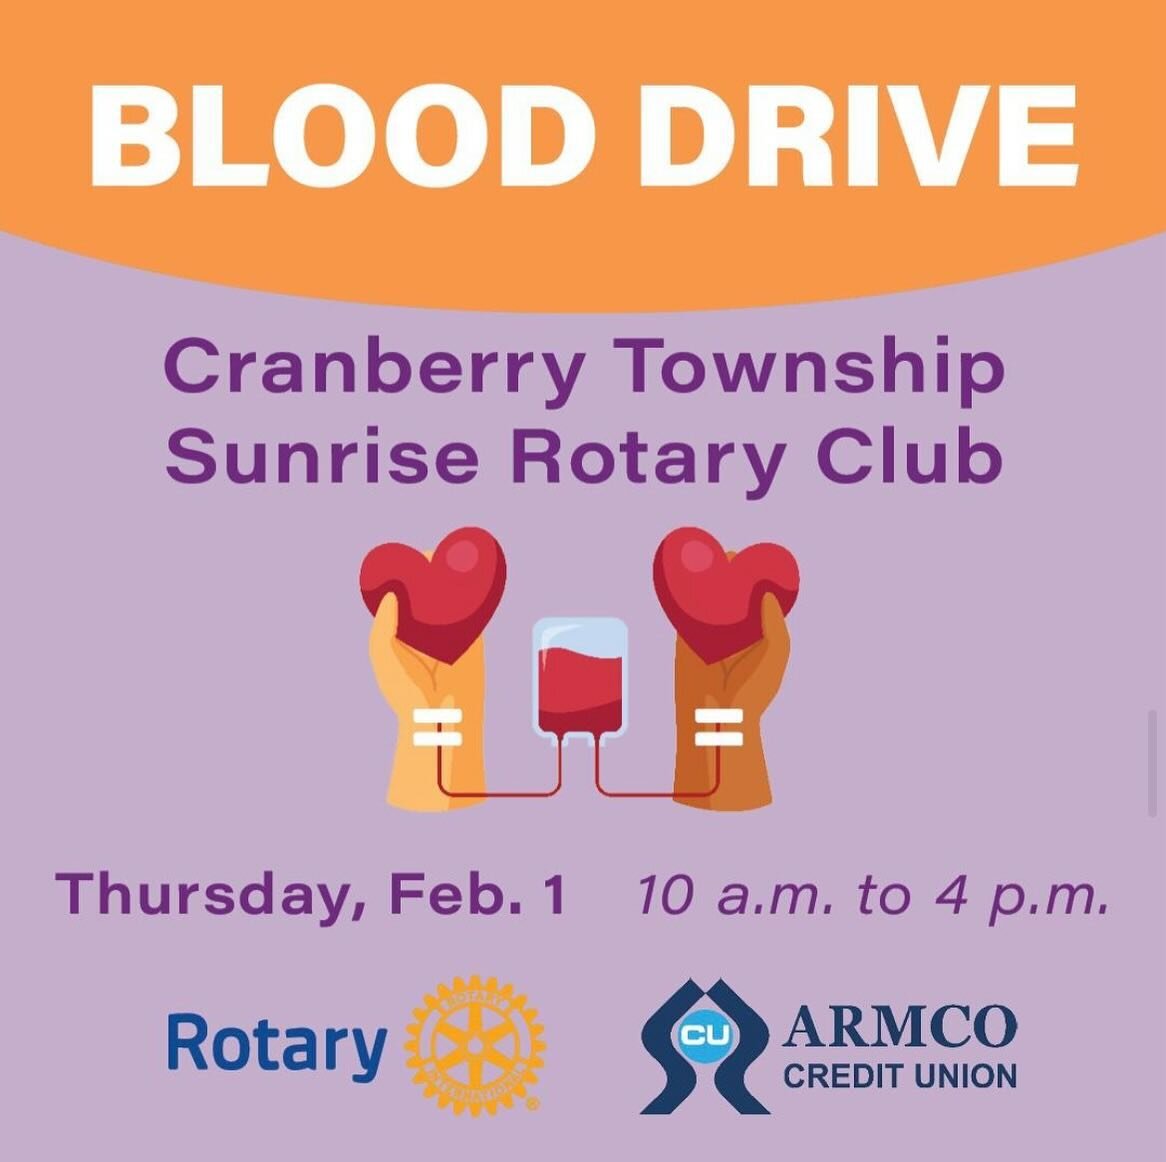 SBCBA members making a meaningful mark on February 1st at the Sunrise Rotary and Armco Credit Union Blood Drive. Their compassion flowed as freely as their generosity. 🩸❤️ #CommunityCaring #blooddrive #southernbutlercounty #lovebutlercounty #mars #c